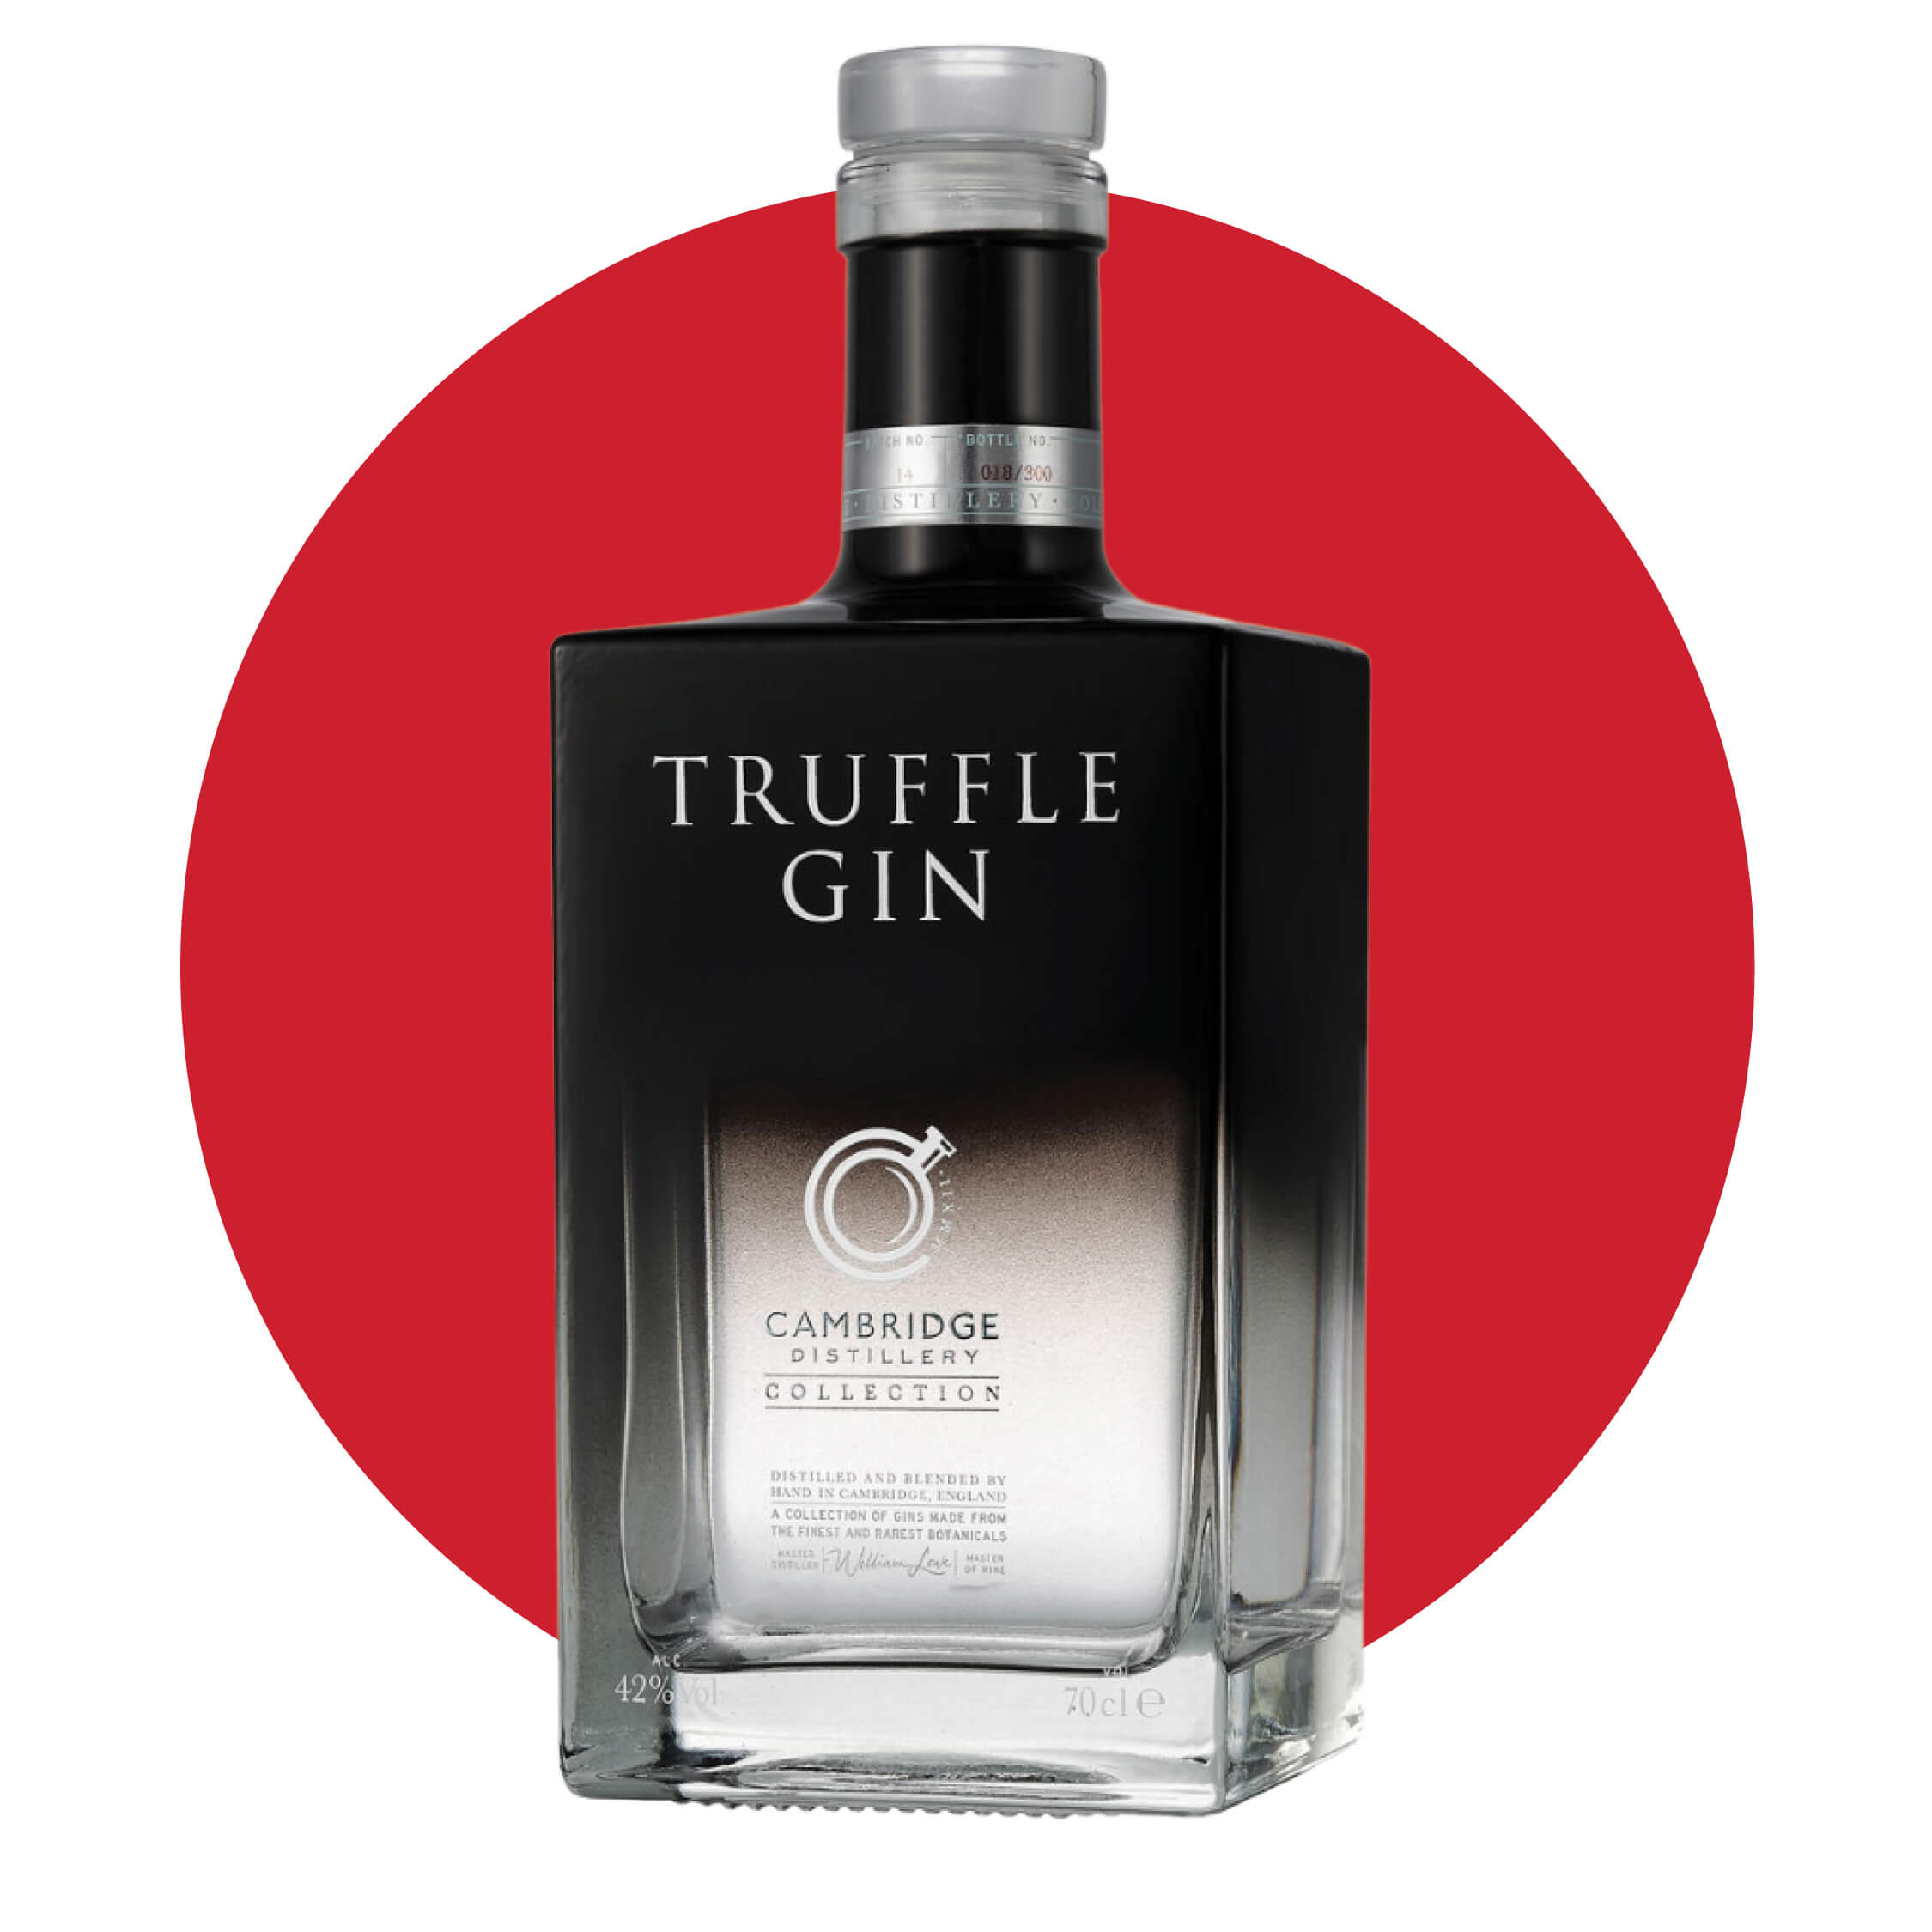 A black and crystal bottle of gin on a red circle